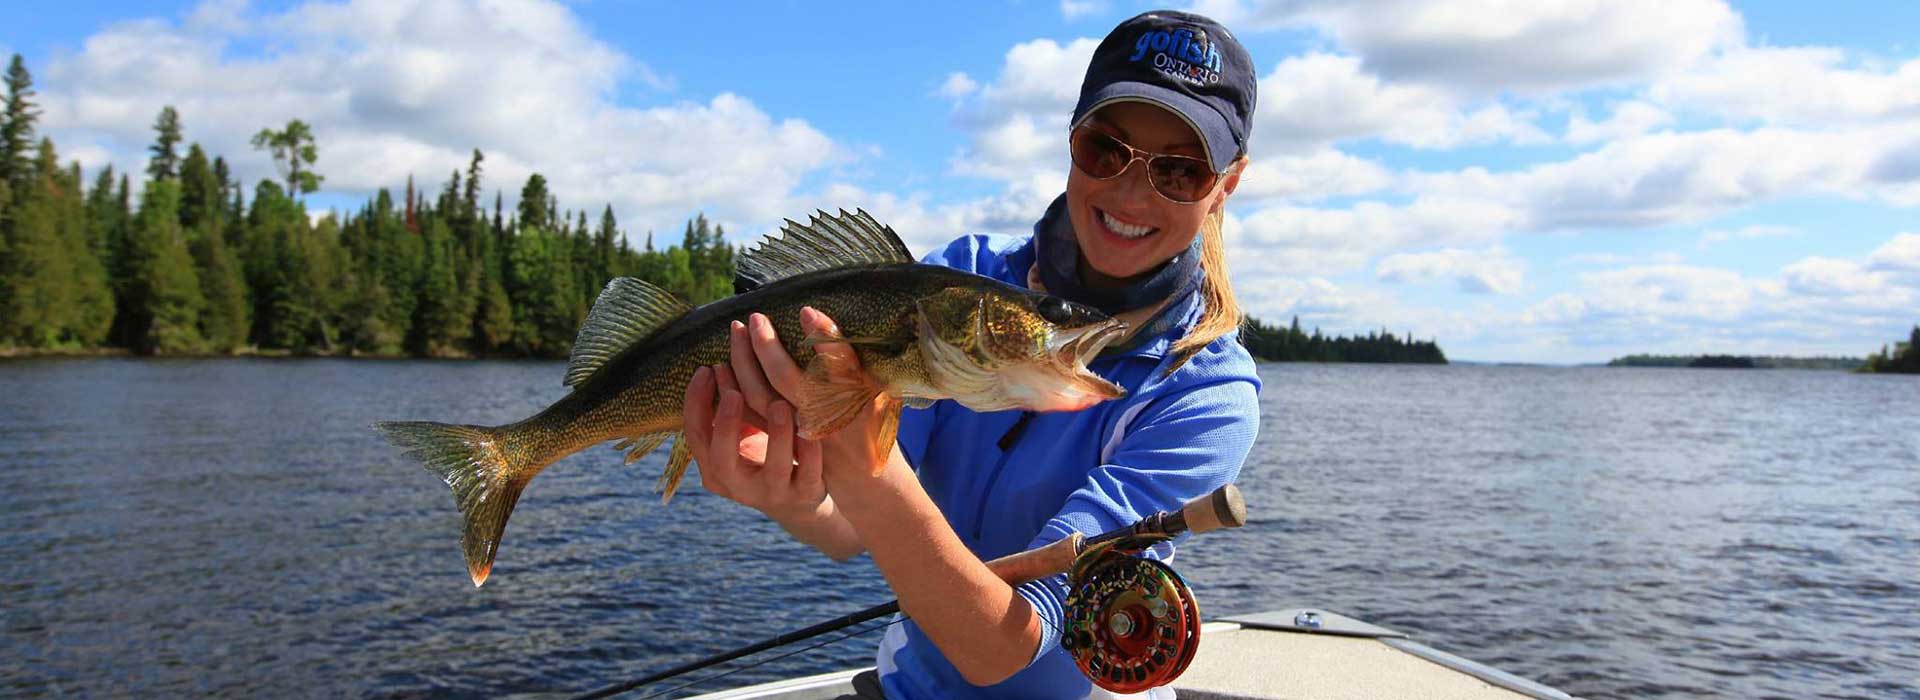 Drive-in Fishing Lodges, Northern Ontario, Canada